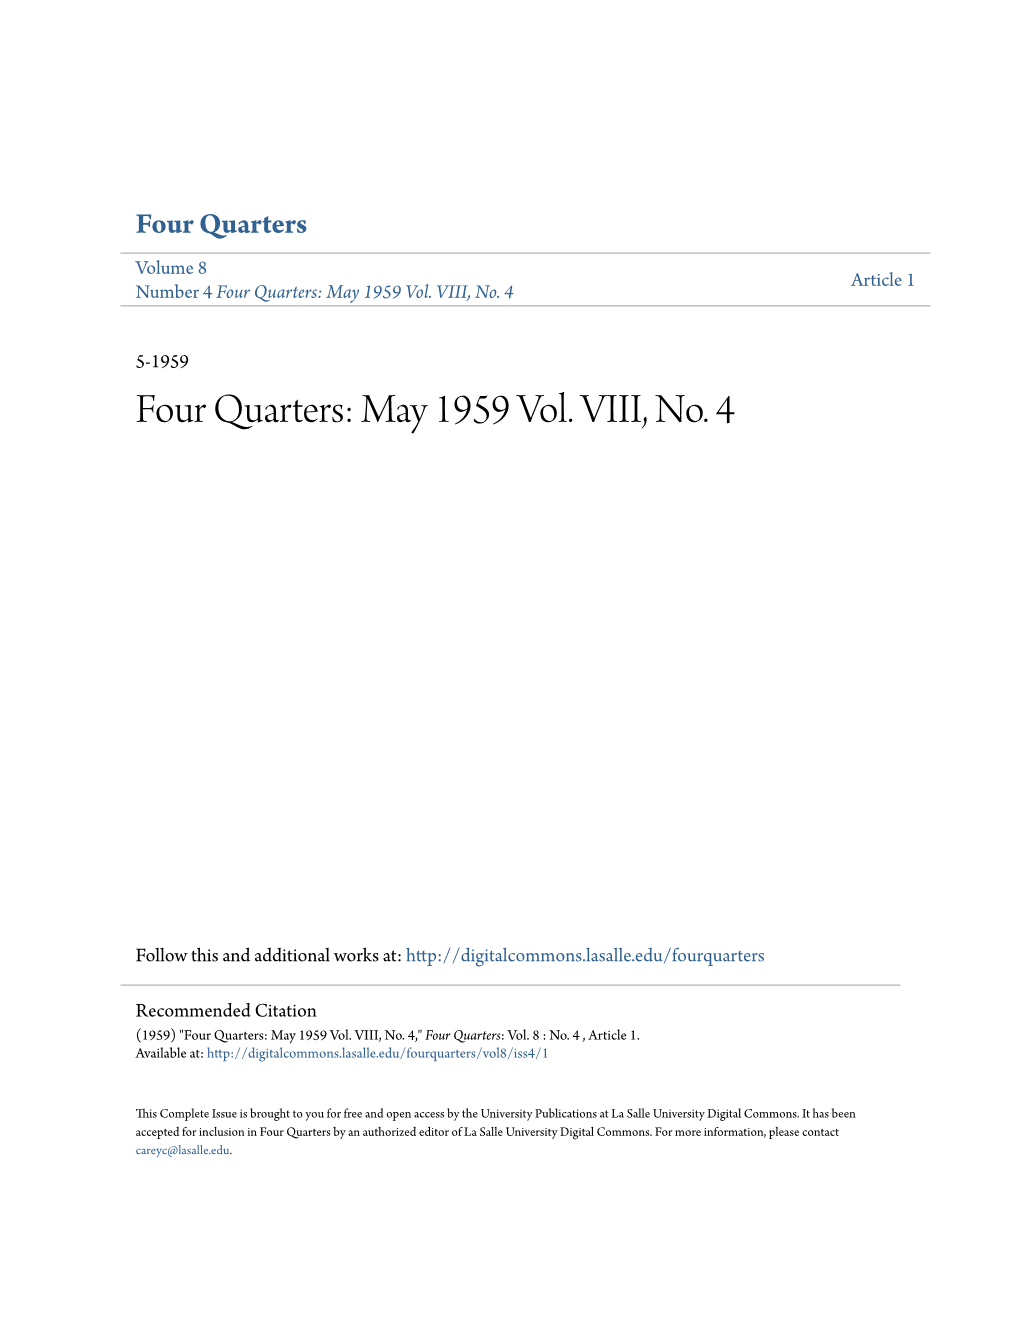 Four Quarters Volume 8 Article 1 Number 4 Four Quarters: May 1959 Vol